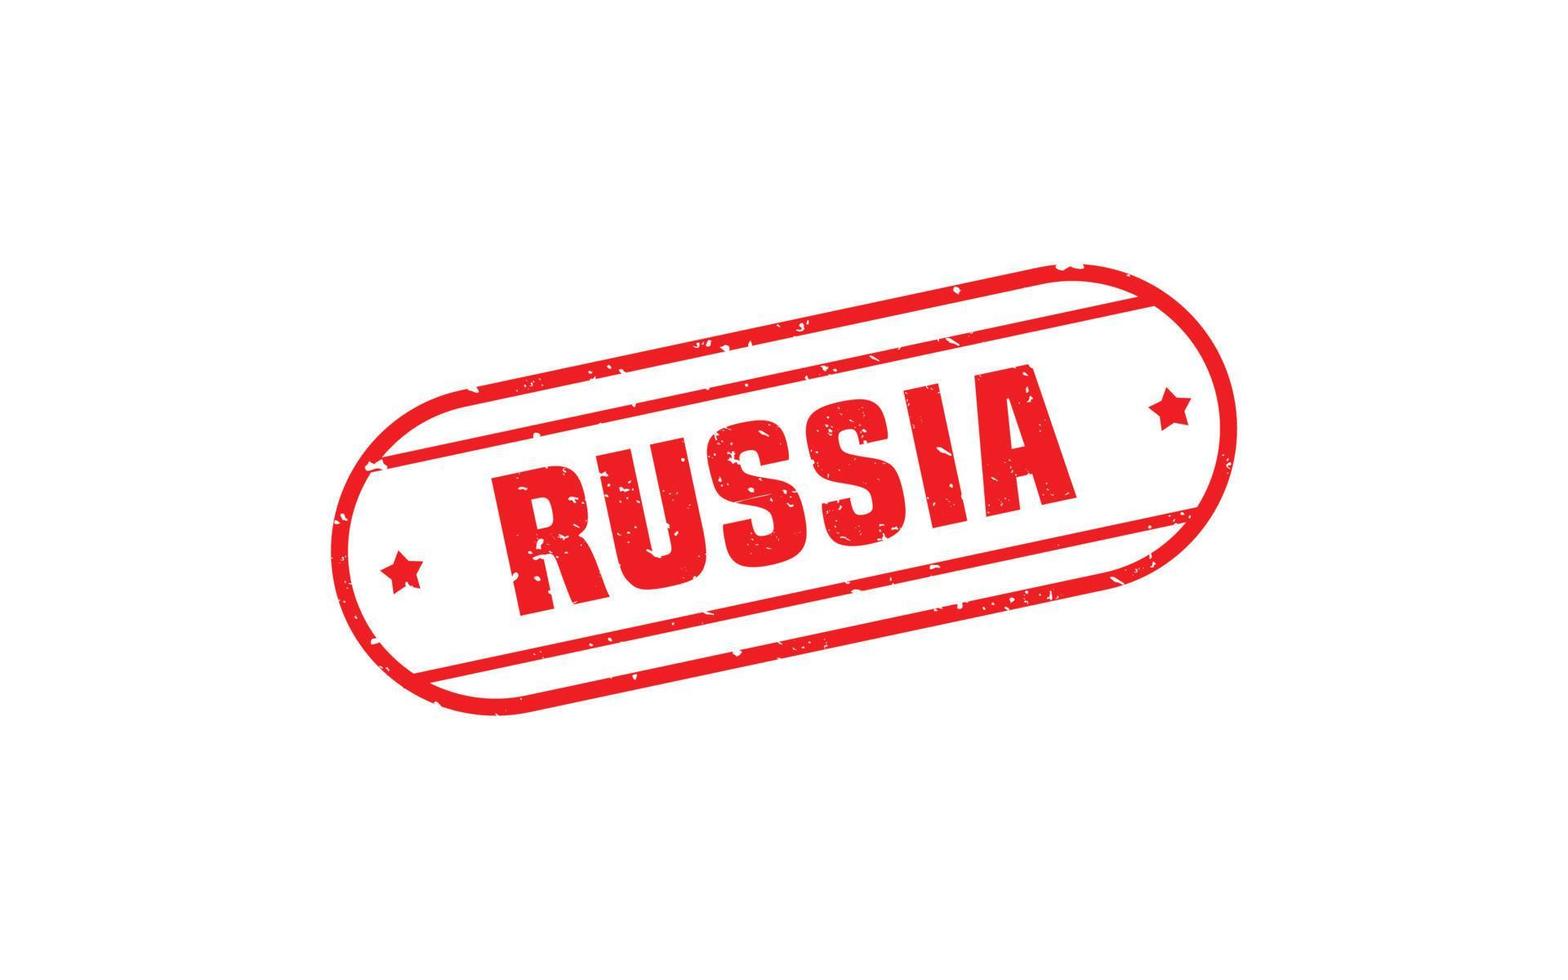 RUSSIA stamp rubber with grunge style on white background vector